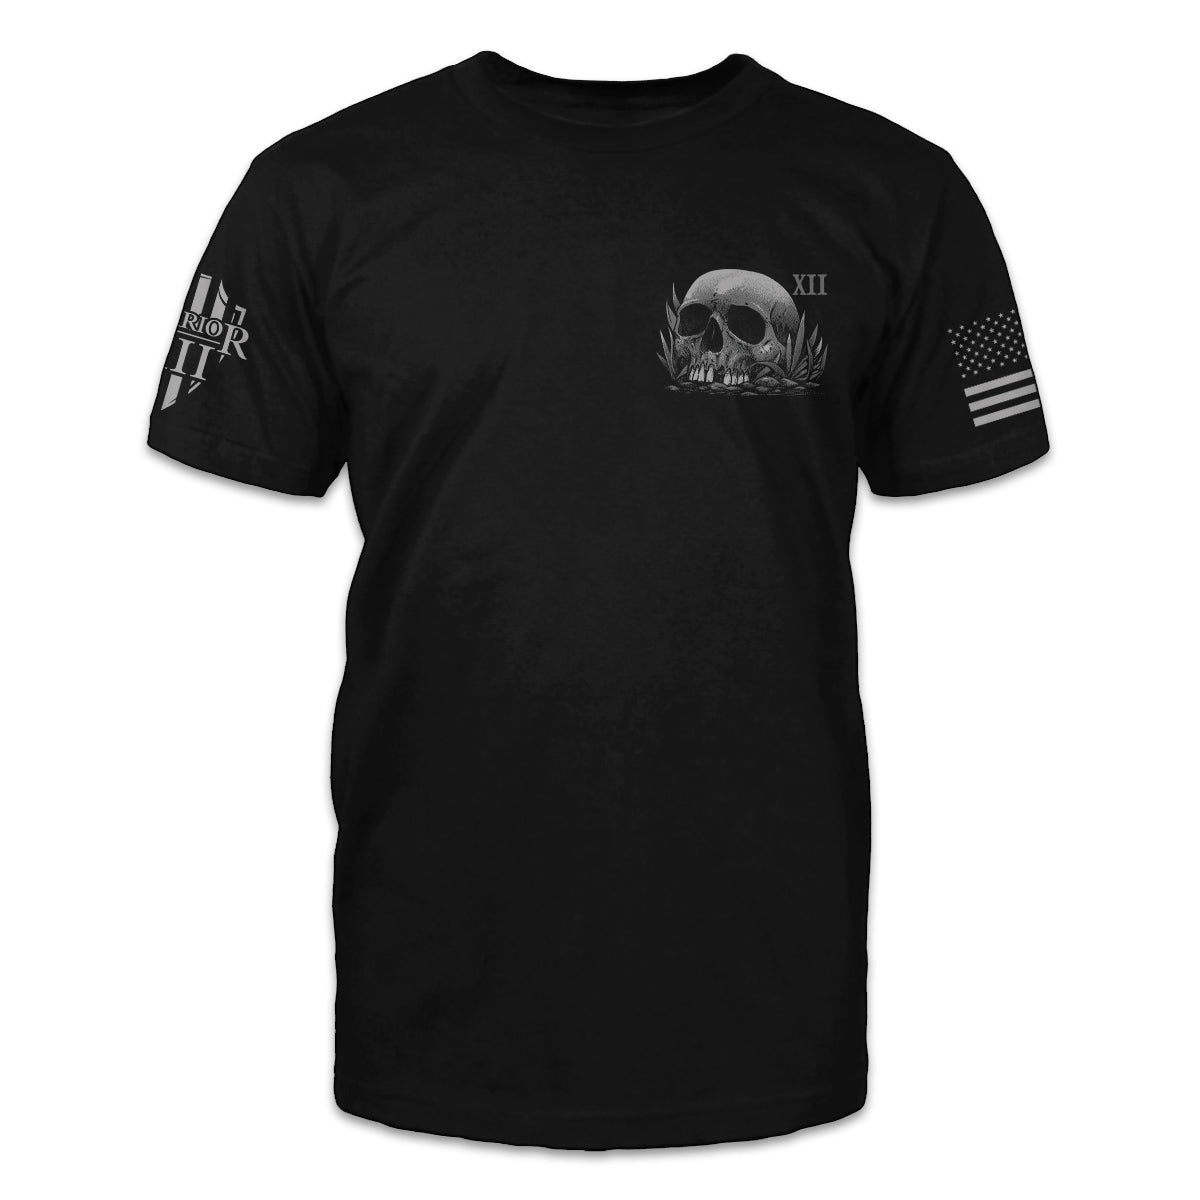 A black t-shirt with a skull printed on the front.